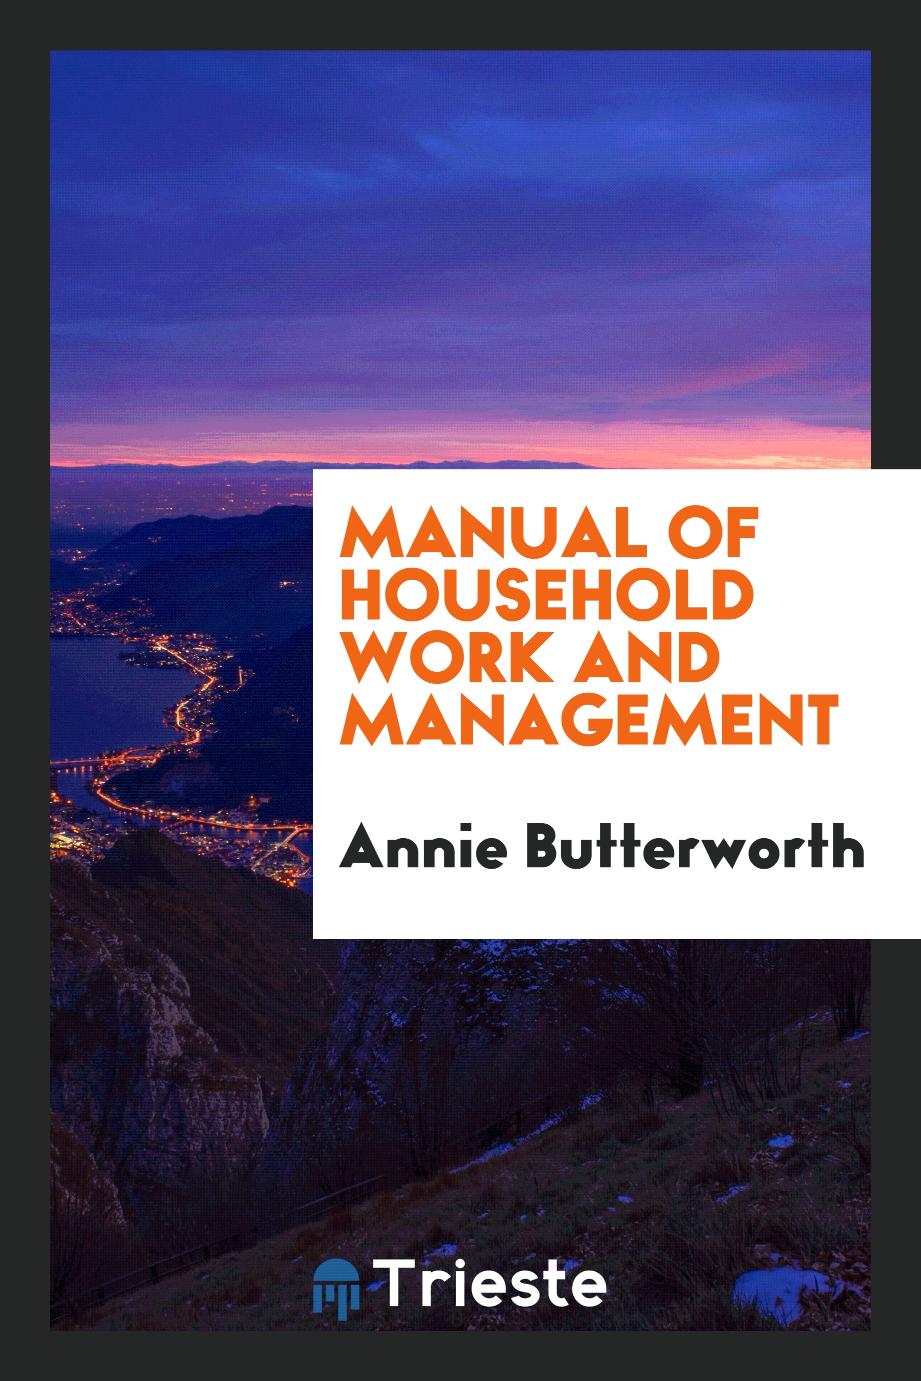 Manual of household work and management